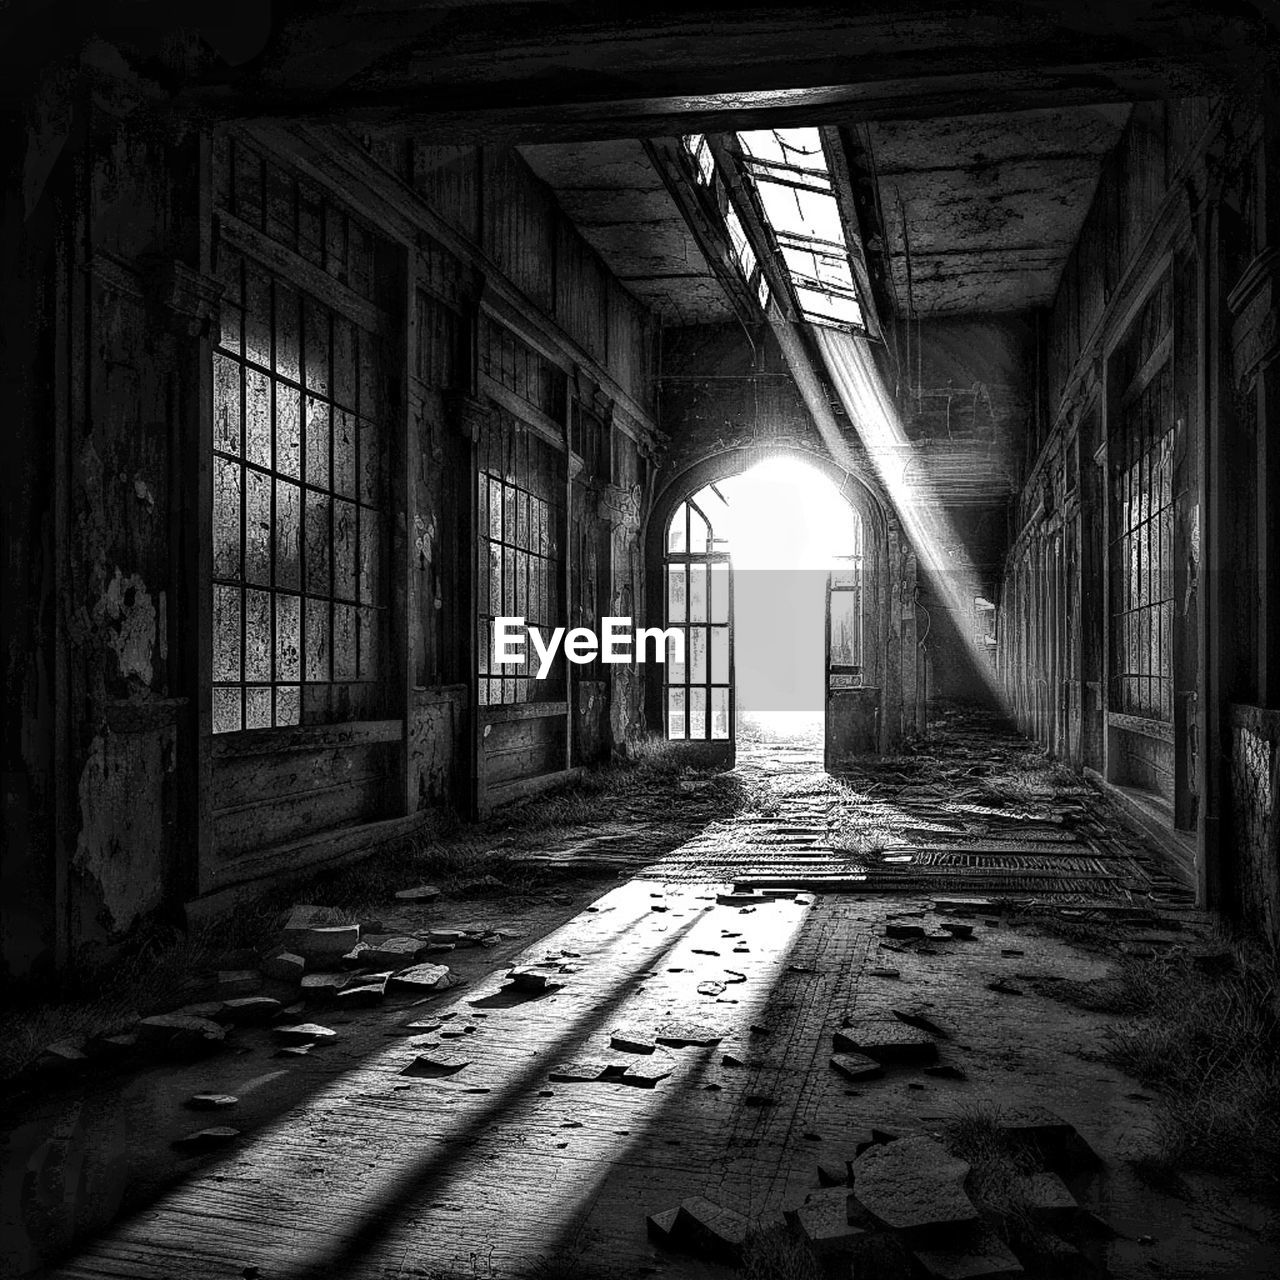 darkness, architecture, light, abandoned, indoors, built structure, window, black, building, monochrome, white, rundown, old, black and white, damaged, no people, monochrome photography, urban area, alley, sunlight, decline, deterioration, history, house, ruined, bad condition, day, flooring, domestic room, the past, old ruin, dirt, ceiling, corridor, arcade, wall - building feature, broken, home interior, street, weathered